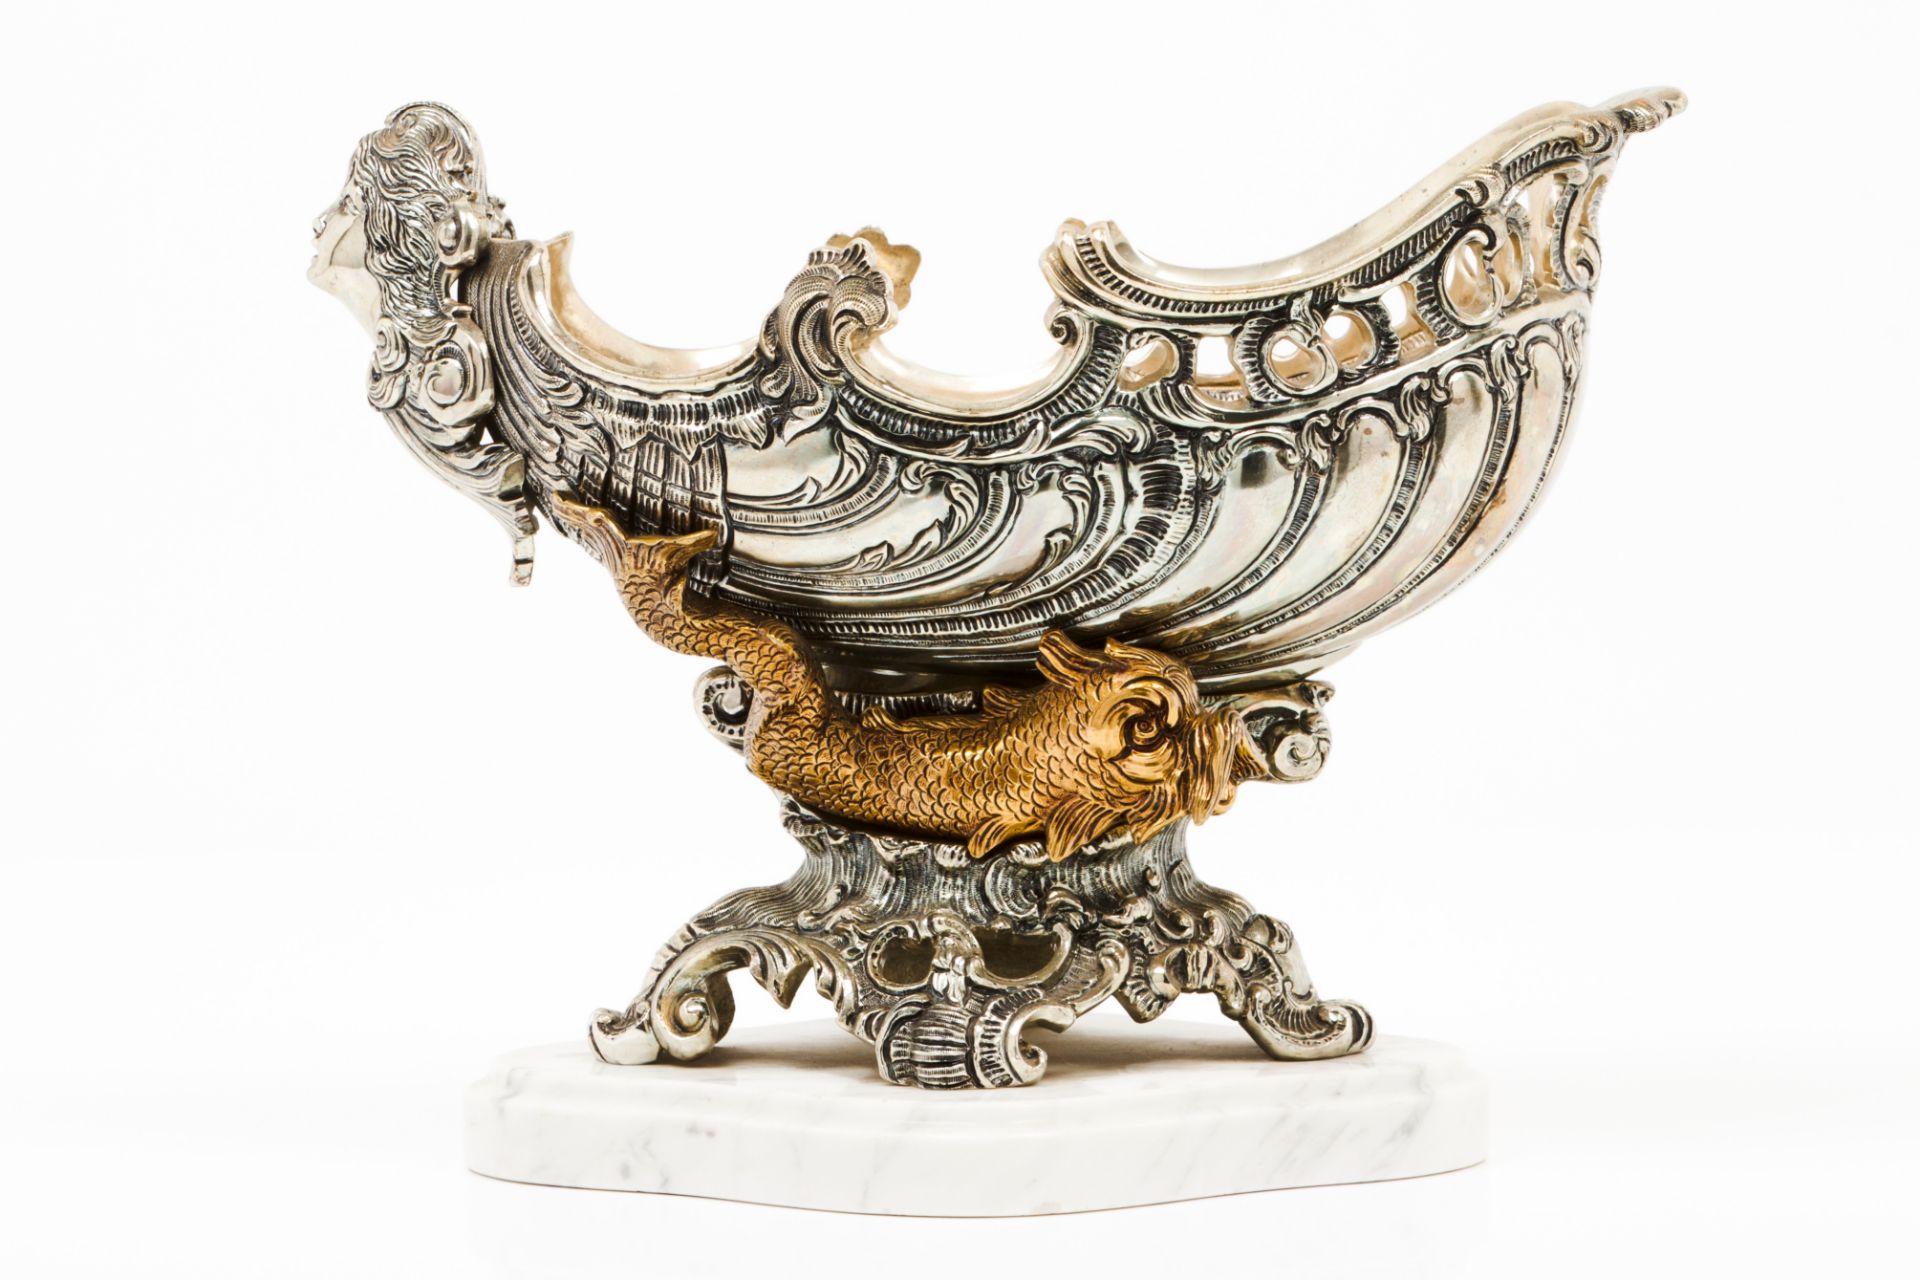 A fruit bowlBoat shaped silvered and gilt bronze Marble stand Europe, 20th century29x36x20 cm